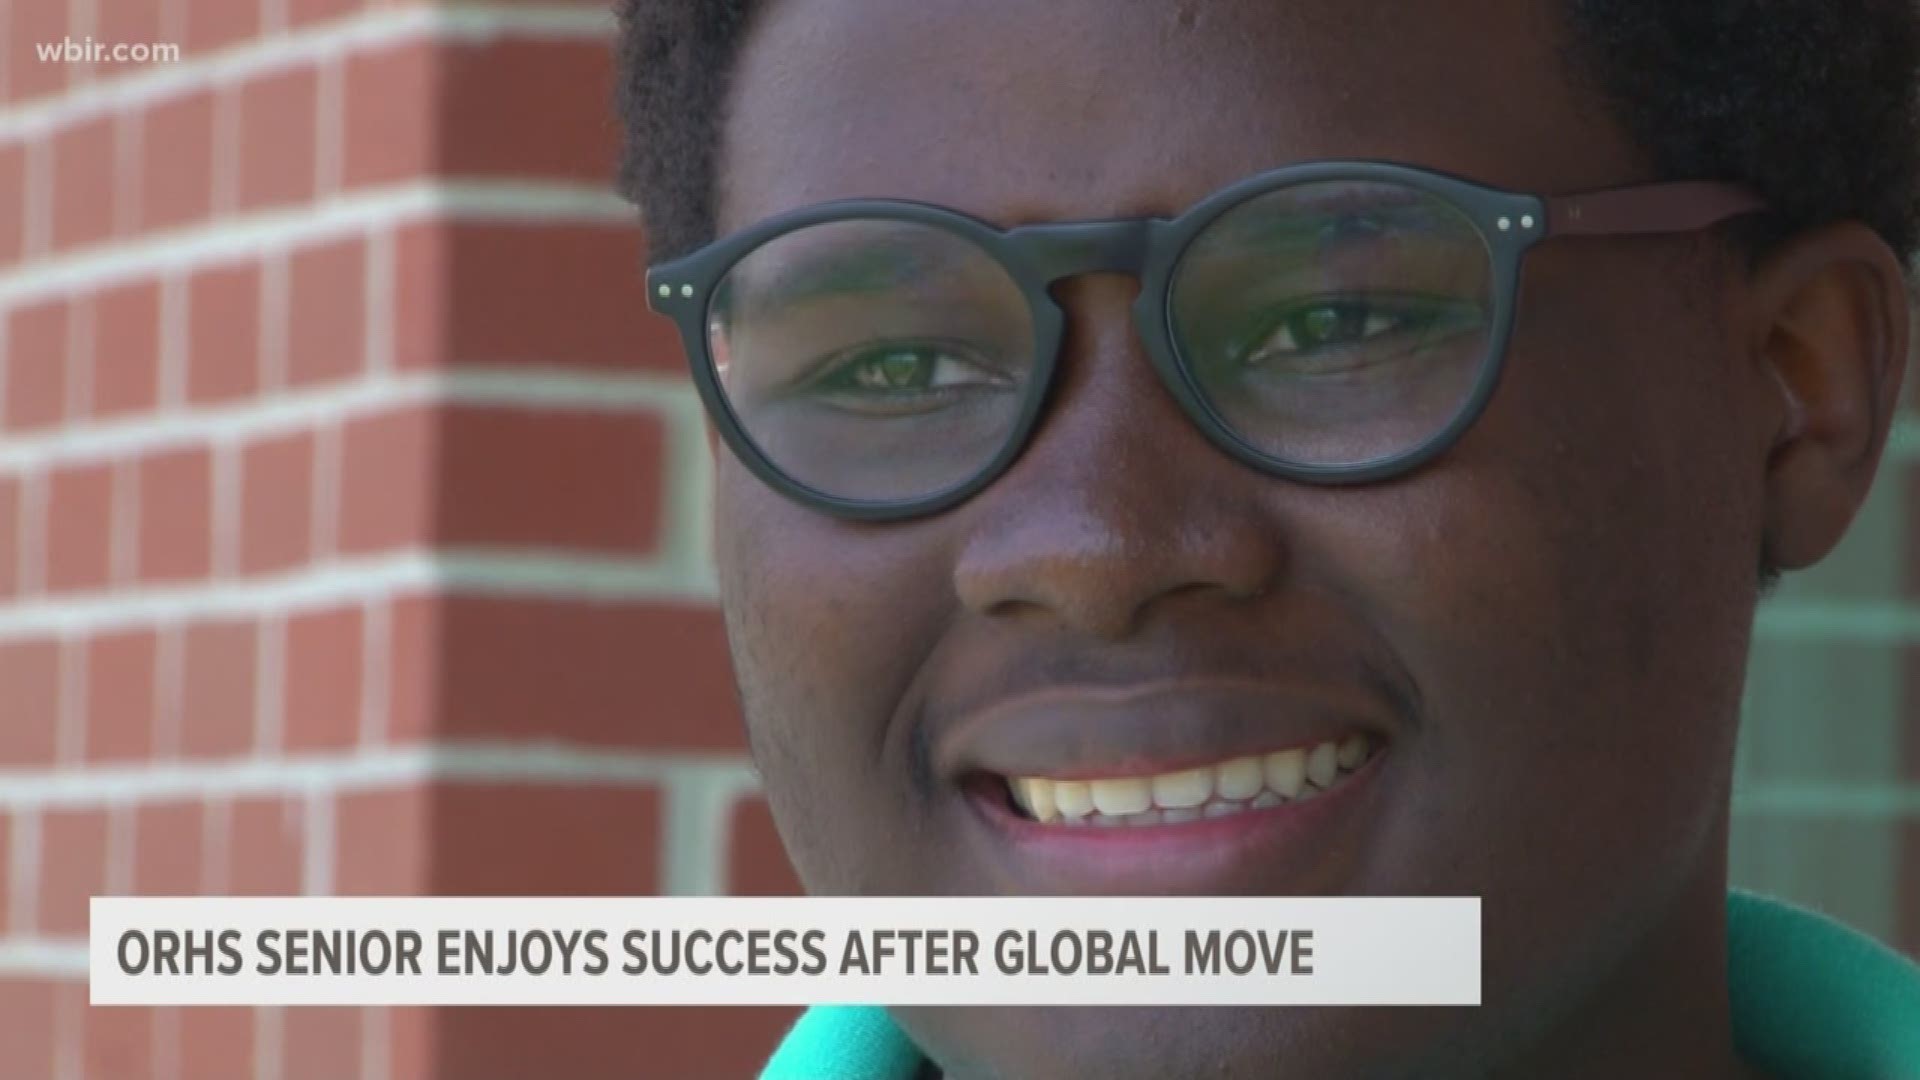 He overcame a tragic loss and and then moved from Zimbabwe to the United States. Now, this Oak Ridge senior is ready to graduate high school.